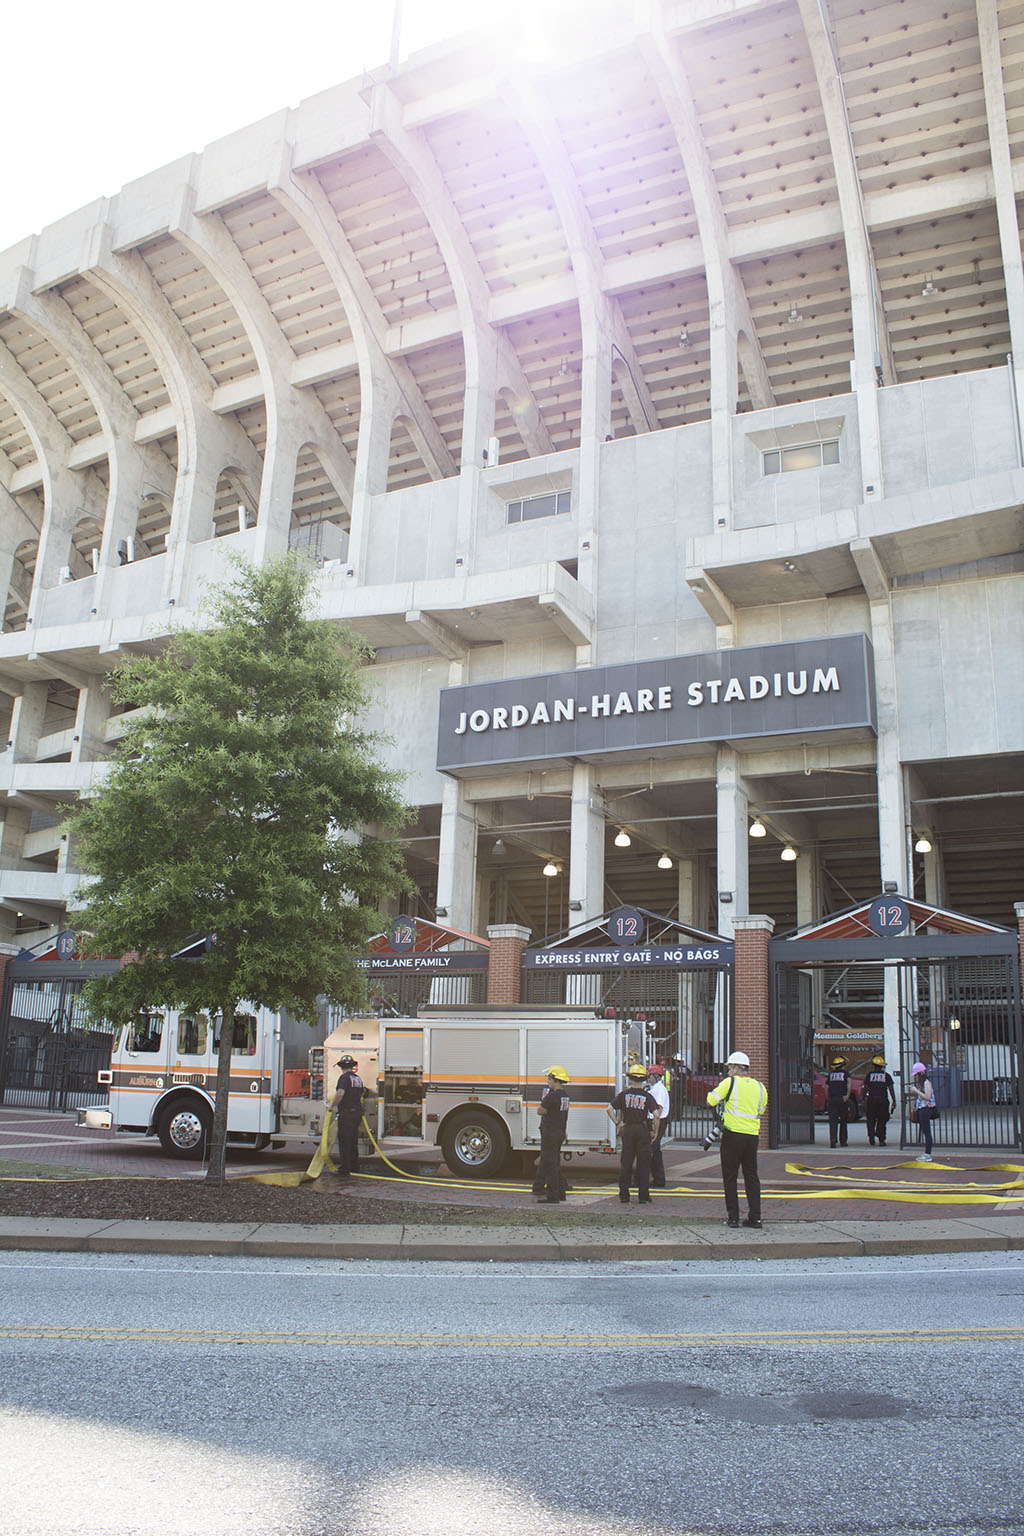 Auburn Fire division doing special fire-safety training at Jordan-Hare